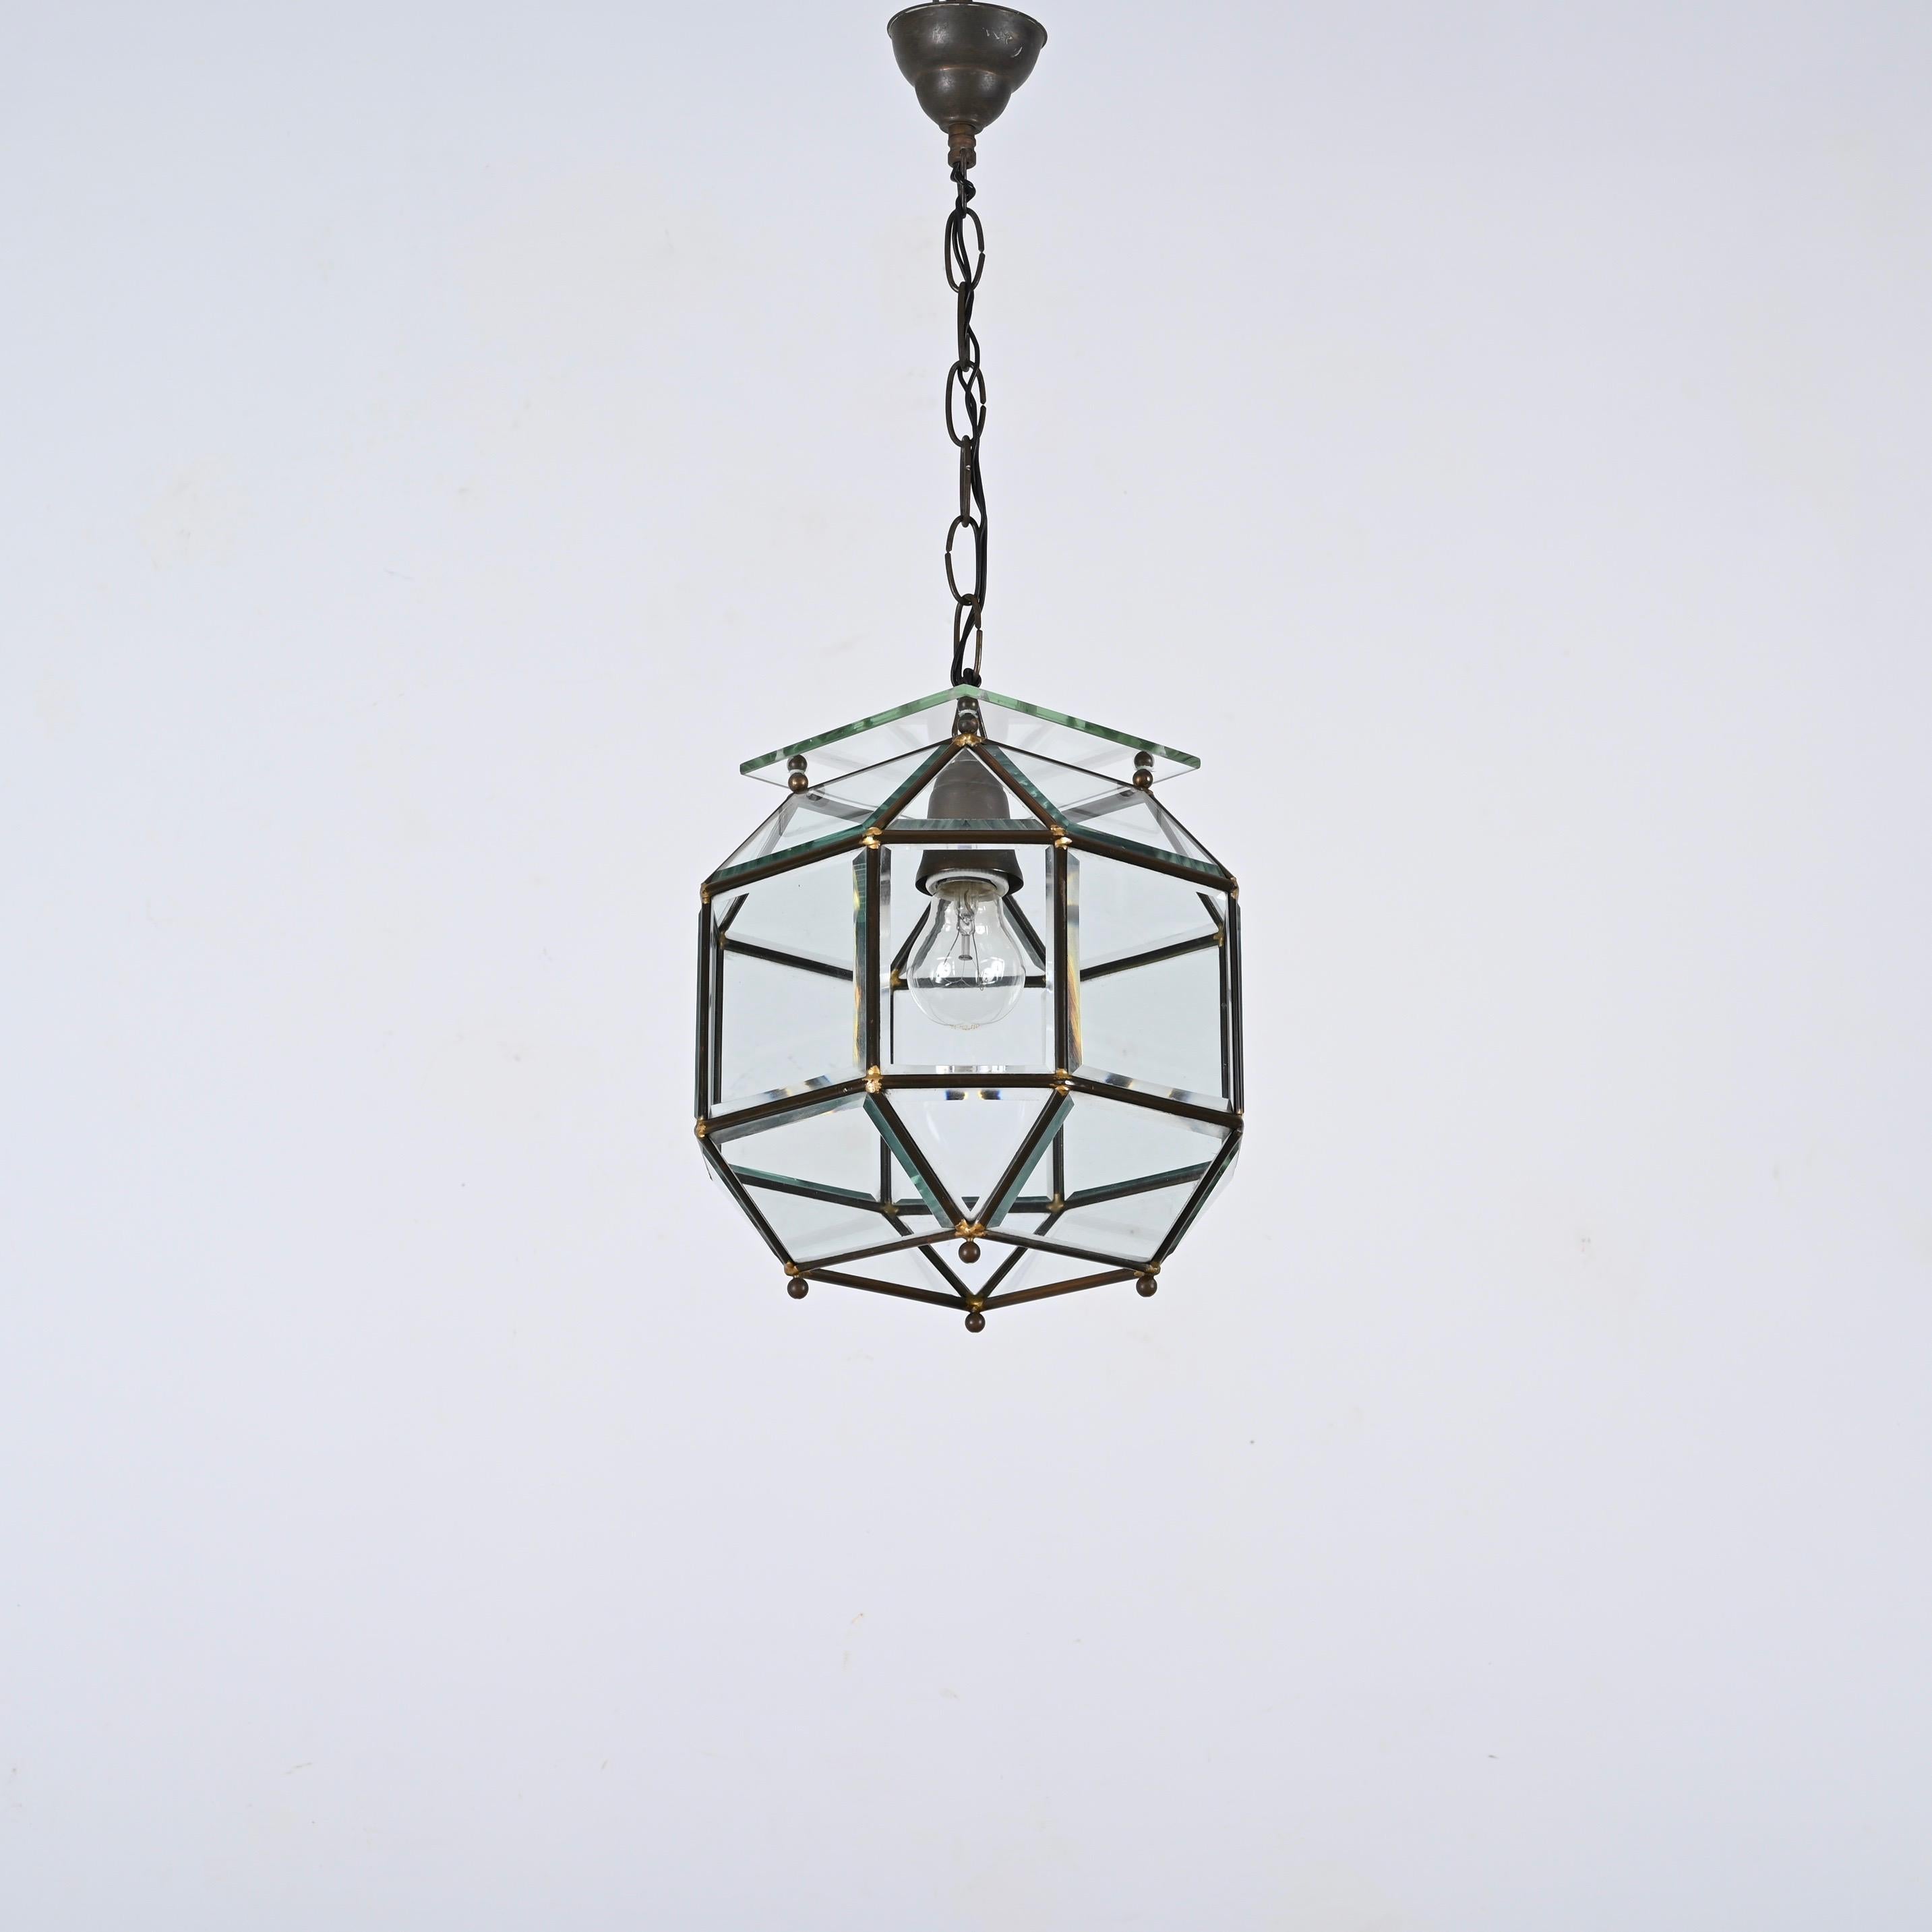 Fabulous pendant in beveled glass and brass. This gorgeous piece was designed in the 1950s and is attributed to Fontana Arte.

This marvelous pendant consist in a brass structure that alternates harmonically beveled glasses of different shapes,